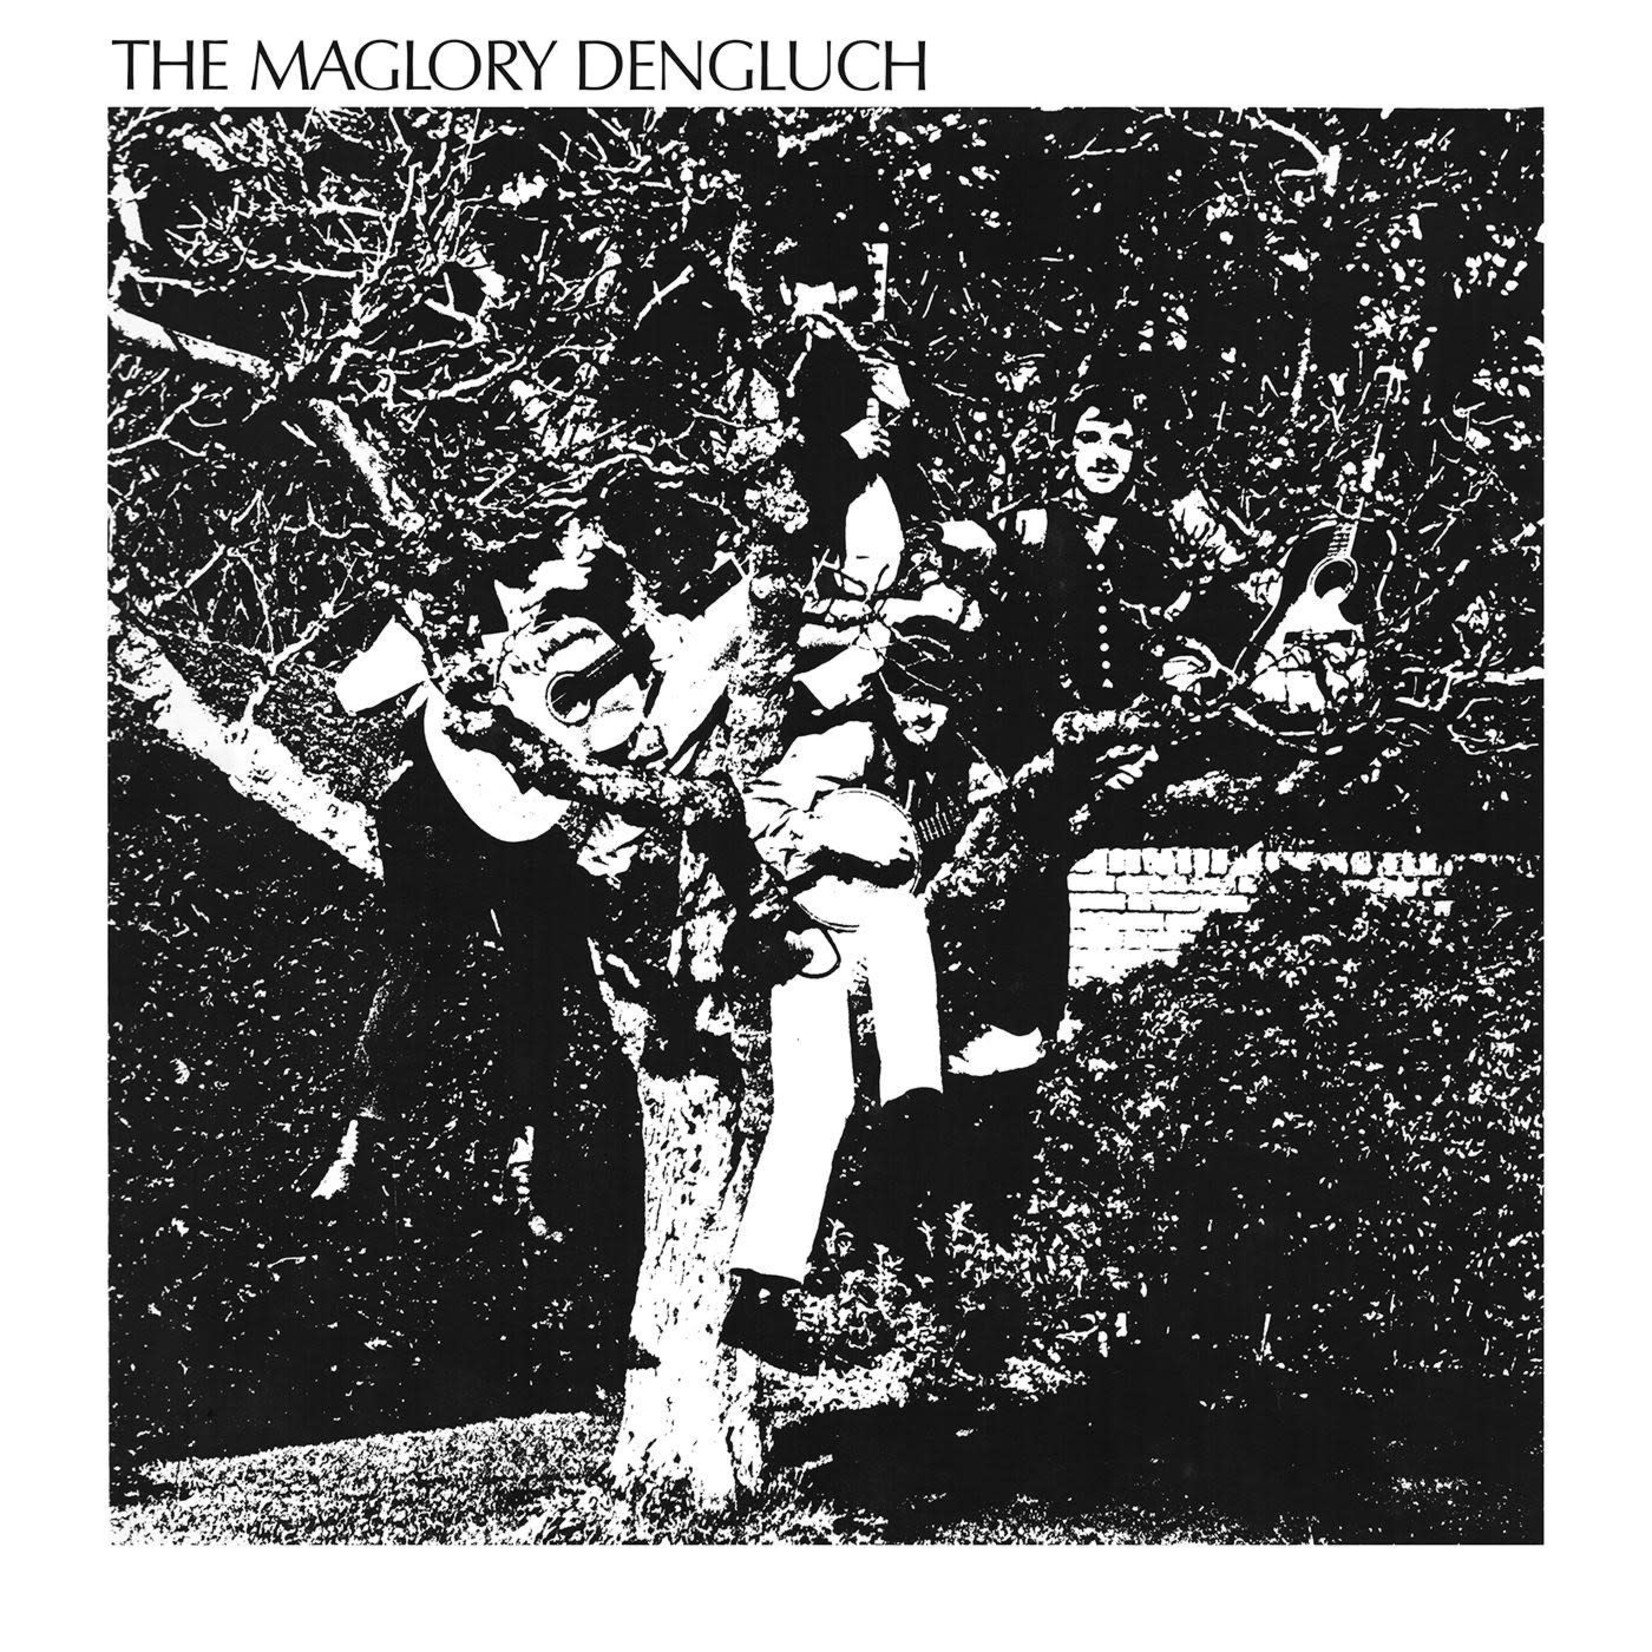 Don Giovanni Maglory Dengluch - The Maglory Dengluch (LP)